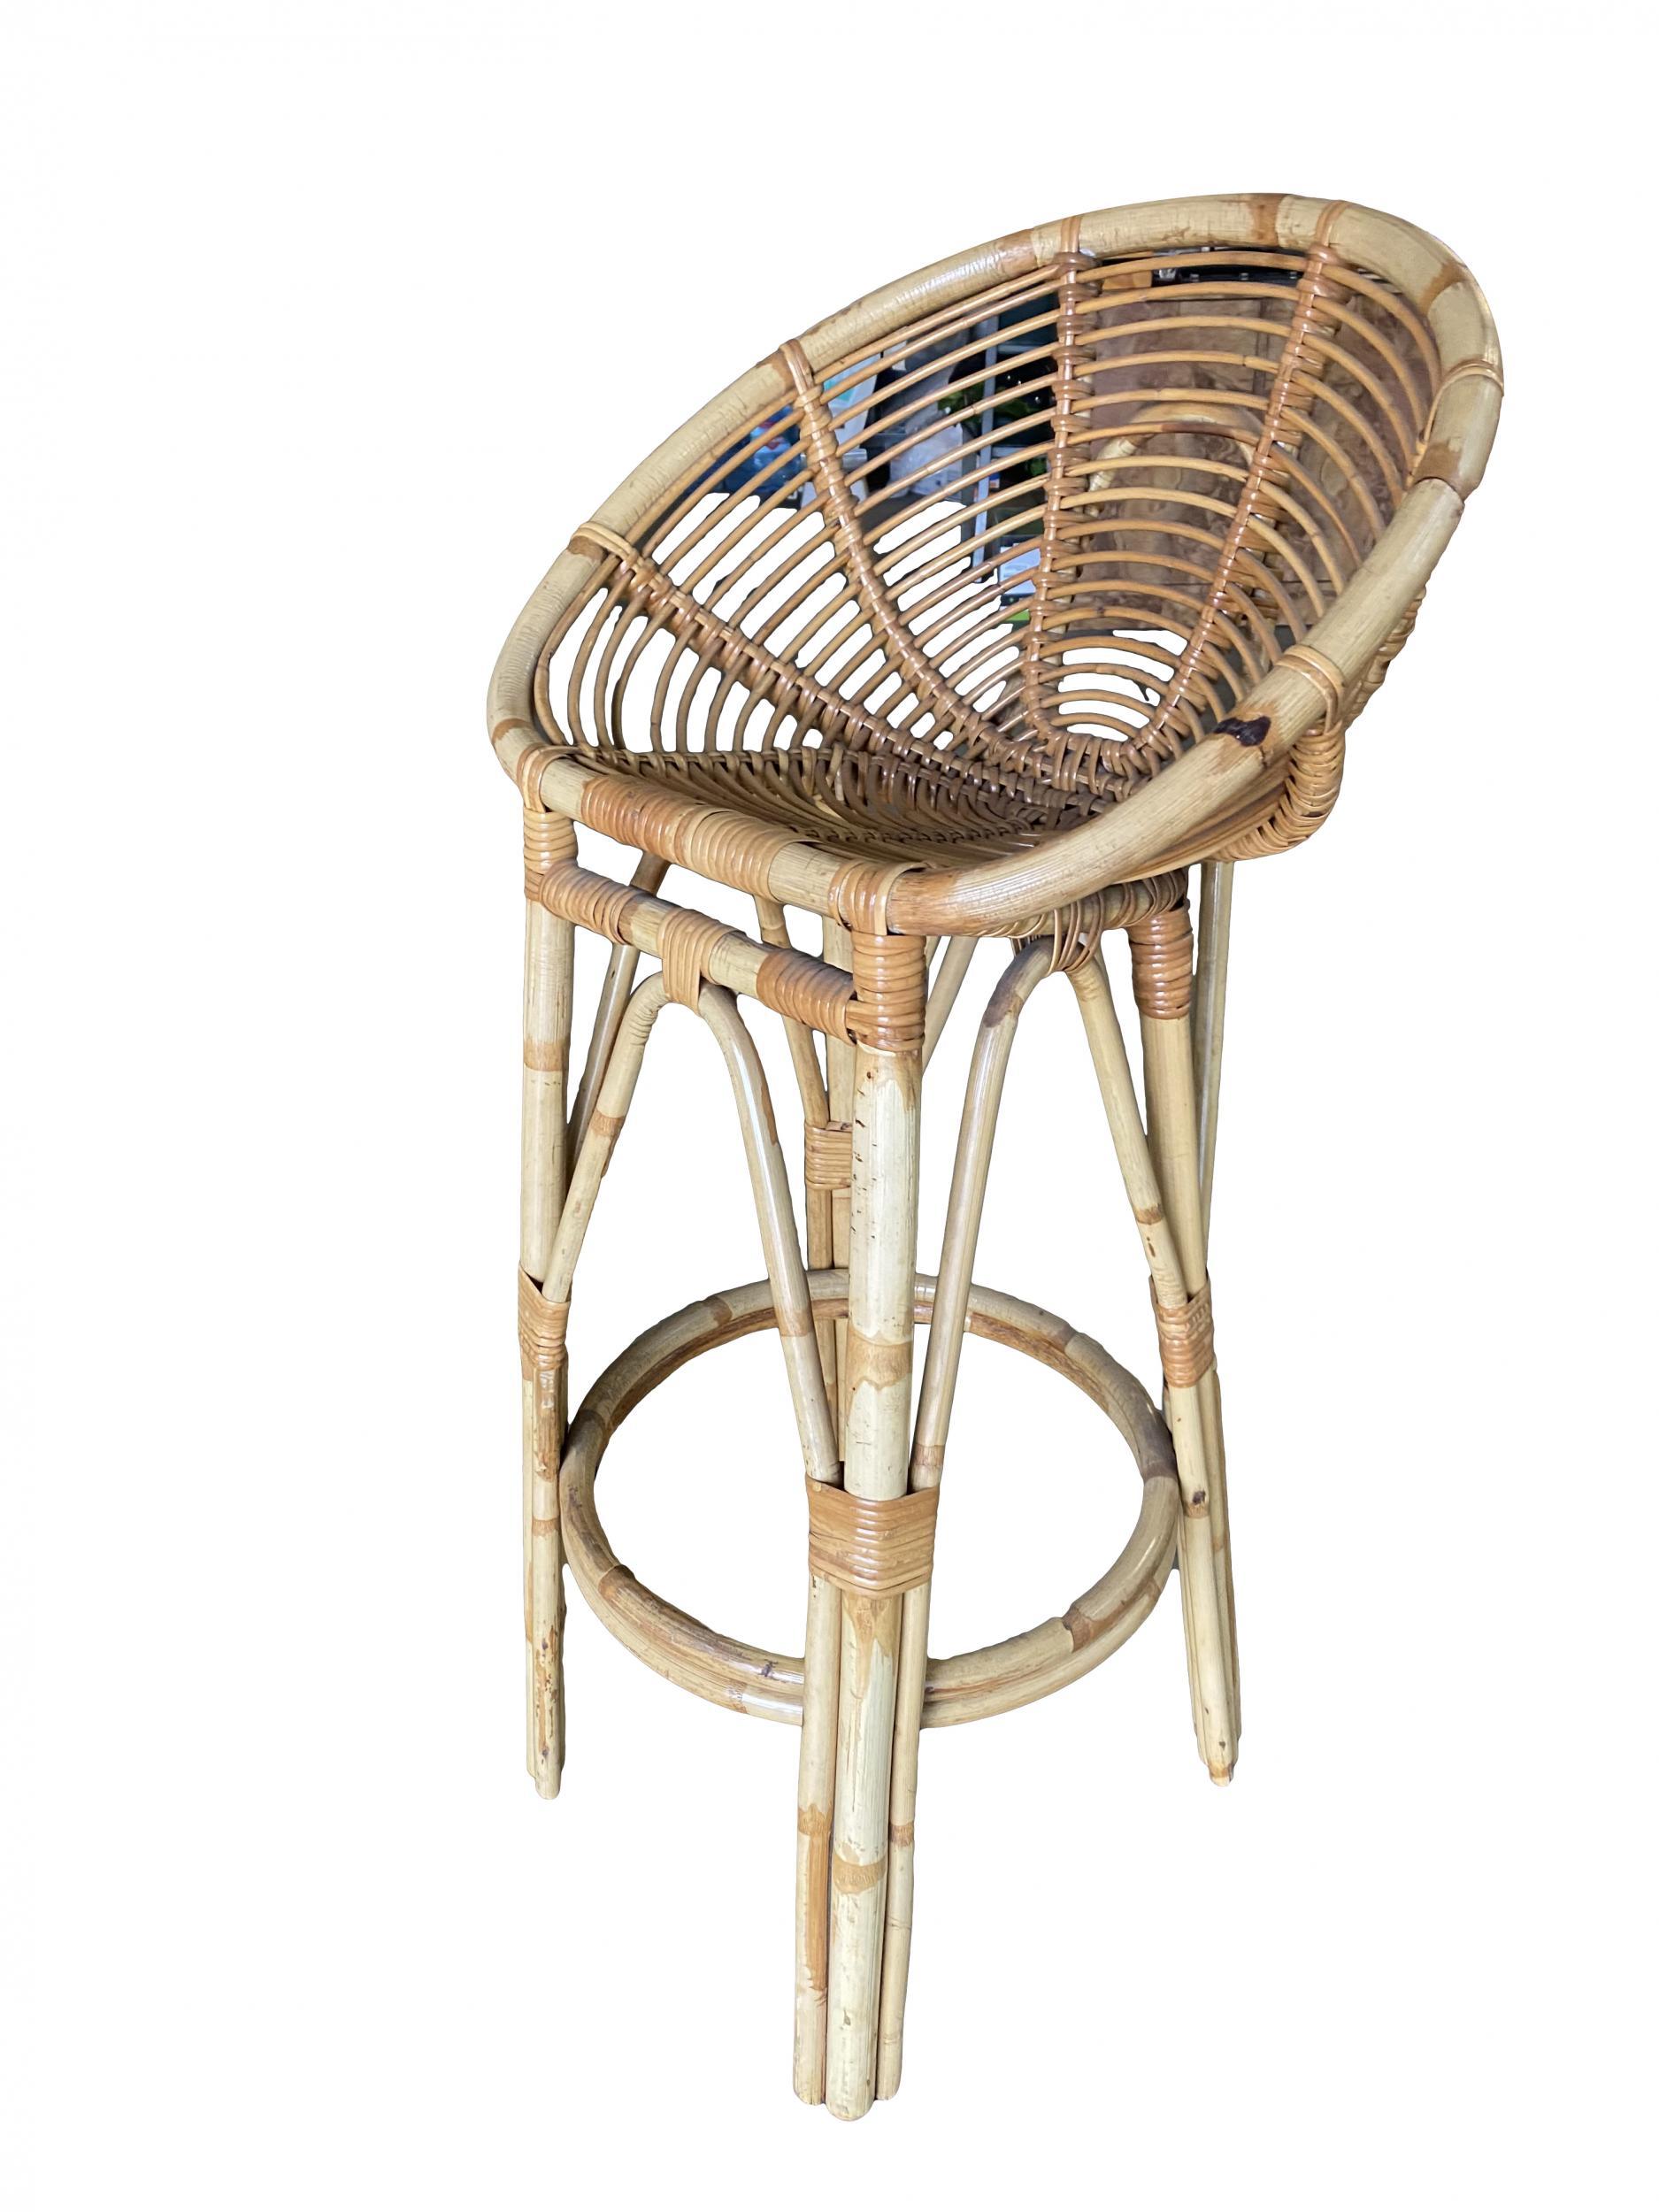 Restored pair of stick rattan bar stools in the manner of Albini featuring a spiraling stick rattan seat with pole rattan legs.